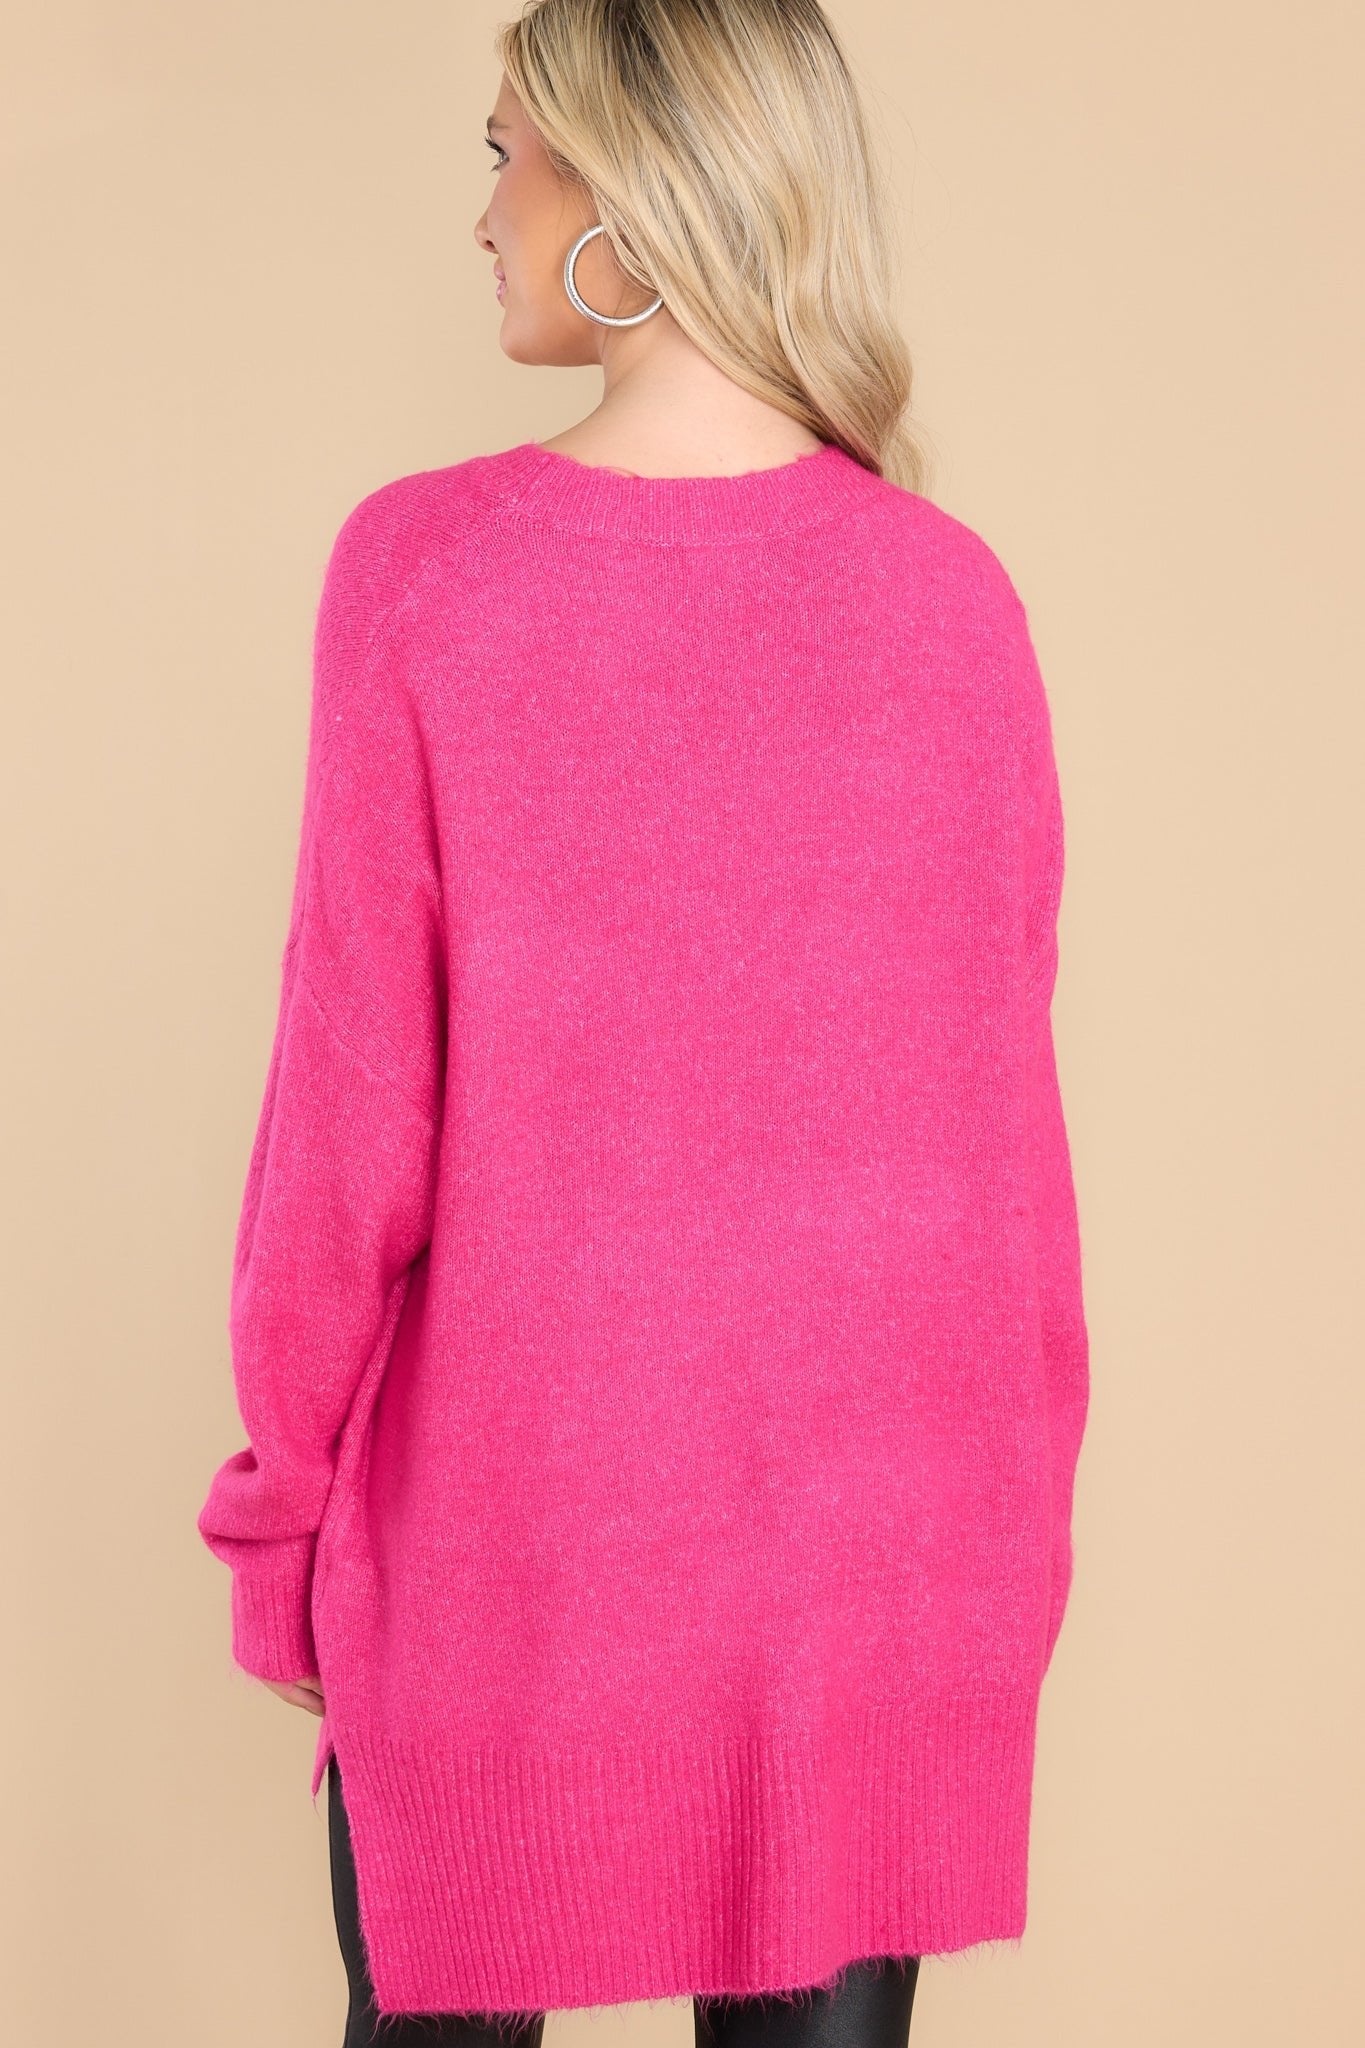 Meant To Be Together Fuchsia Sweater - Red Dress